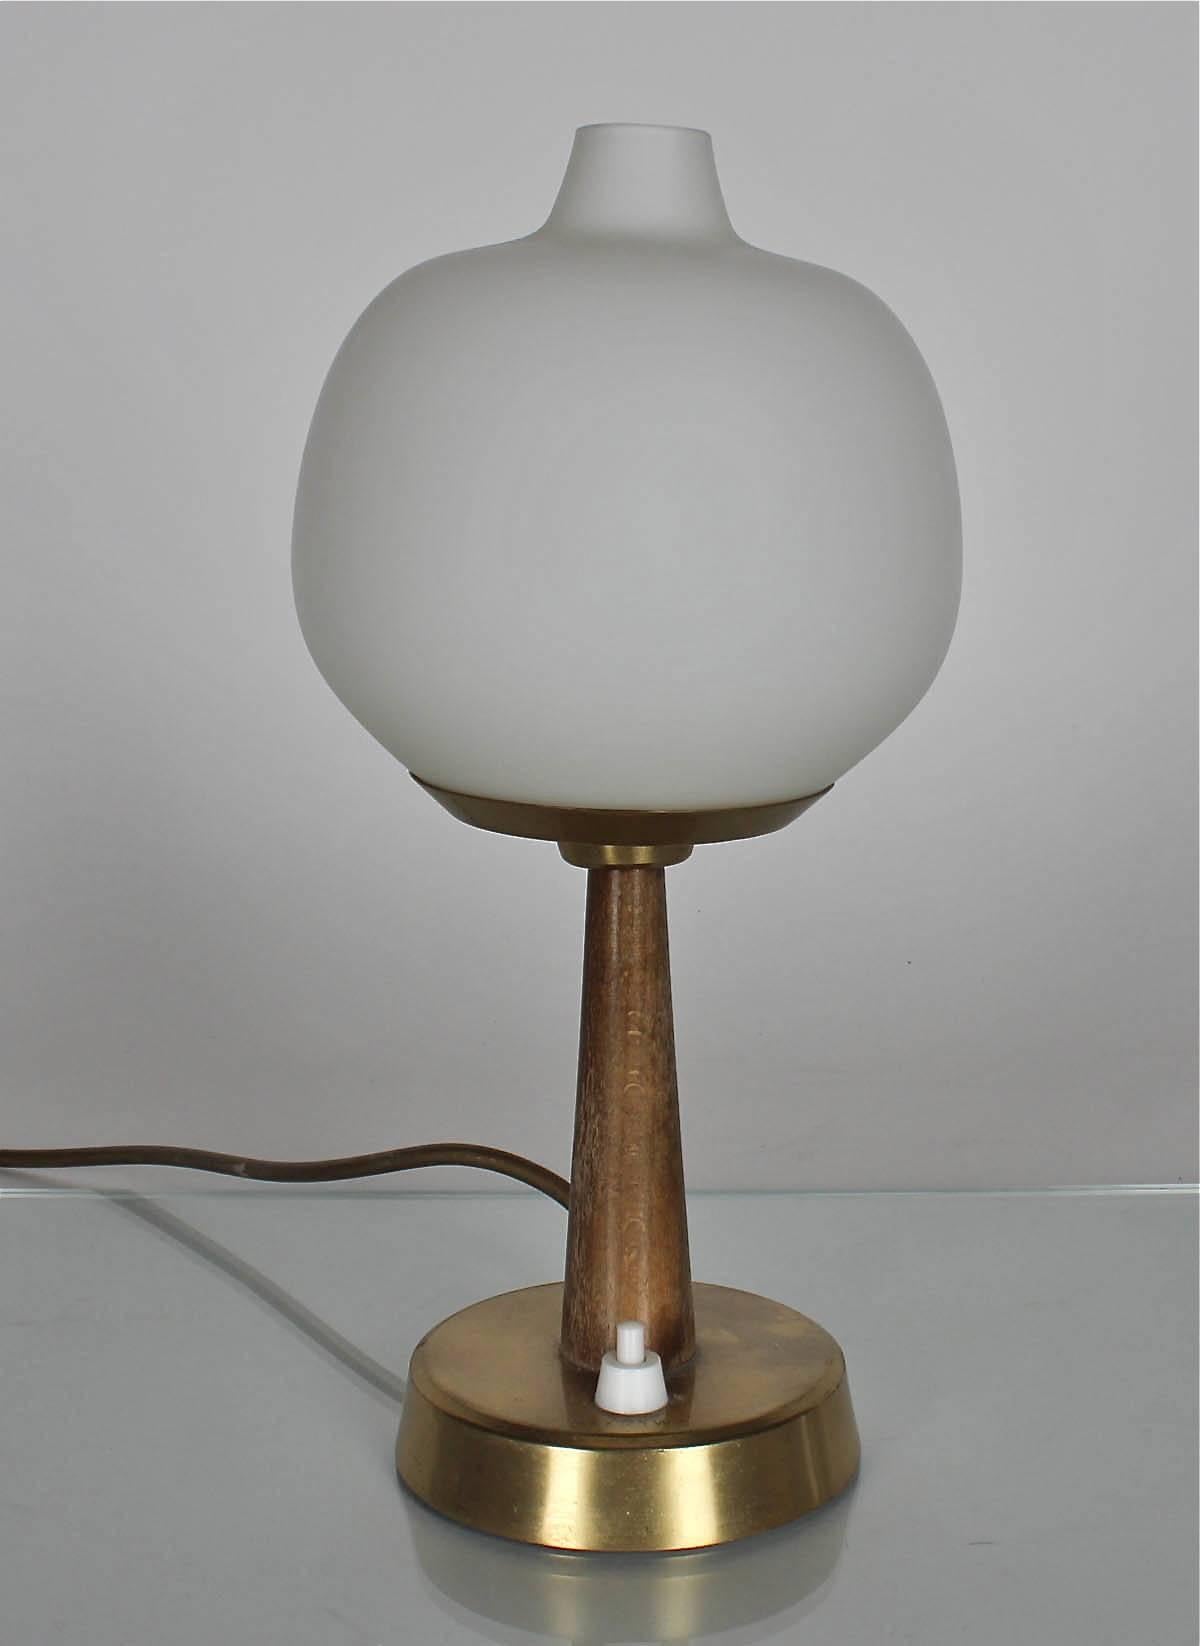 A table lamp designed by Hans Bergstrom for Ateljé Lyktan, Model 702. Circa 1940s.
Hand blown opaline glass shade on beech and brass base. Marked by manufacturer.
Measures: H 11". Existing electrical wiring, rewiring available upon request.